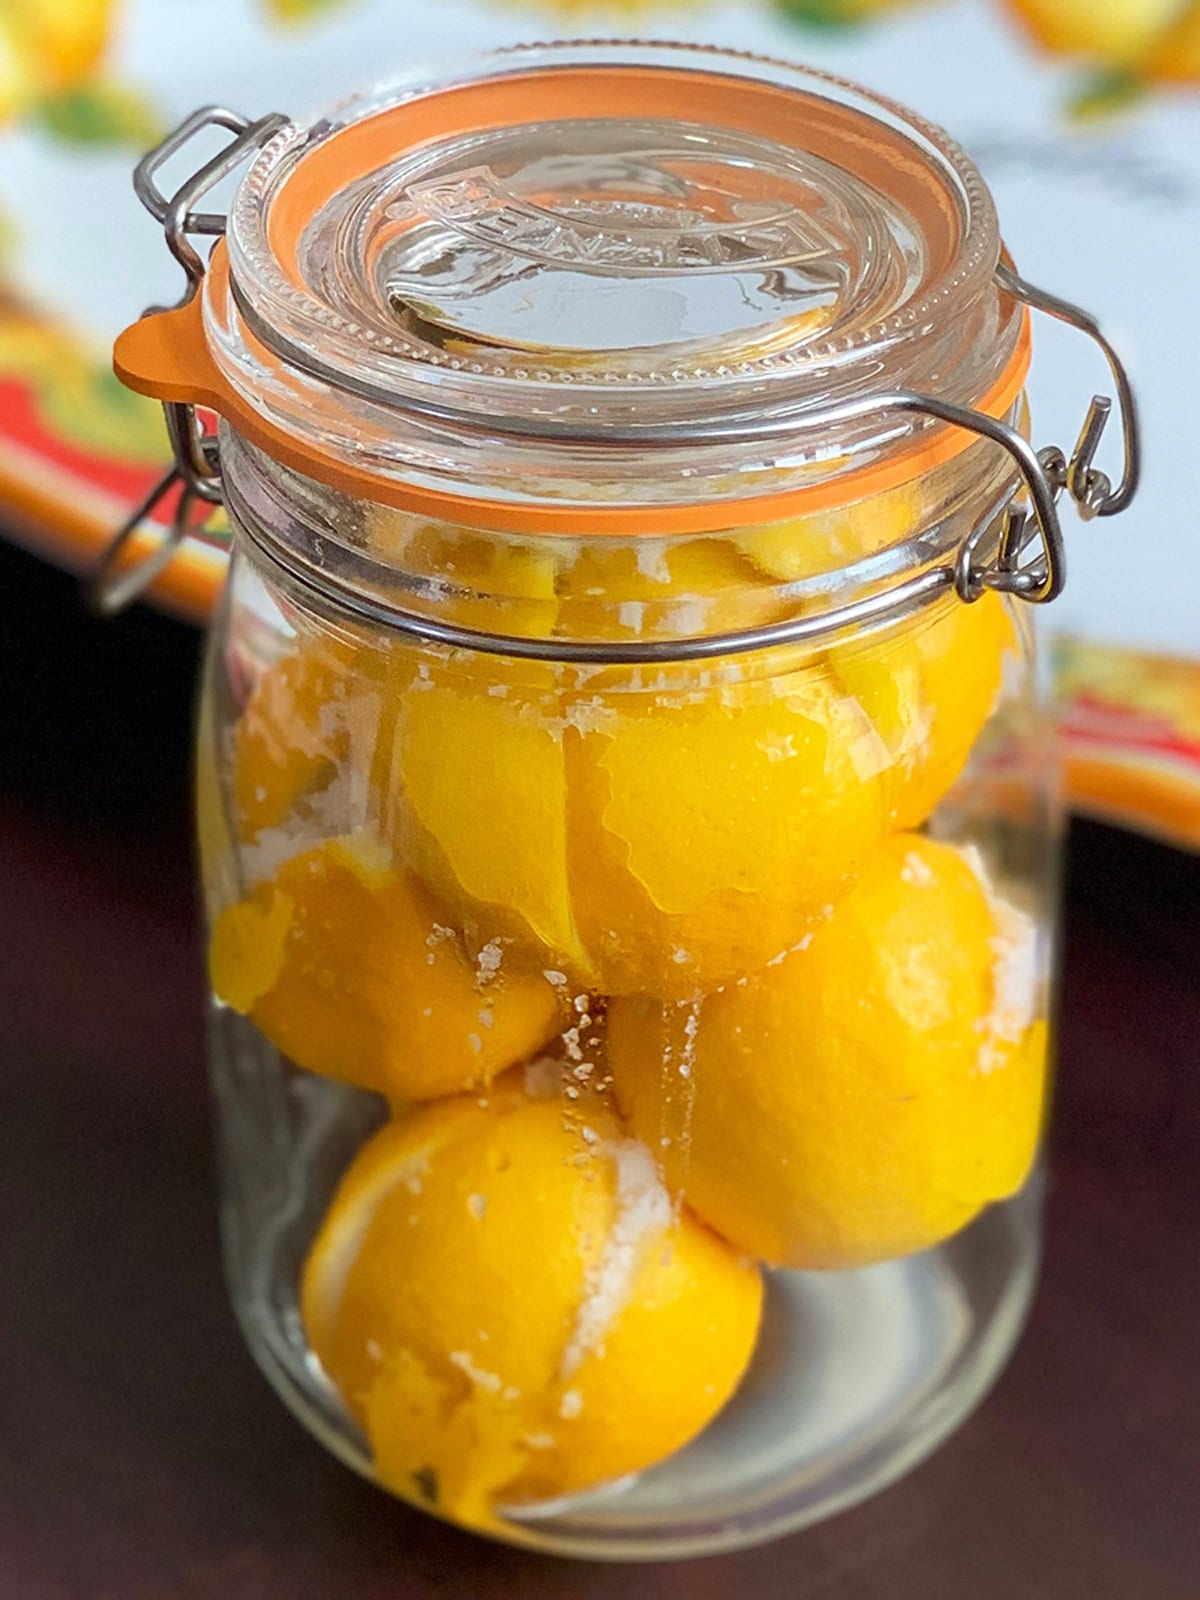 Fresh lemons with salt added and placed in a jar to start the preserving process.